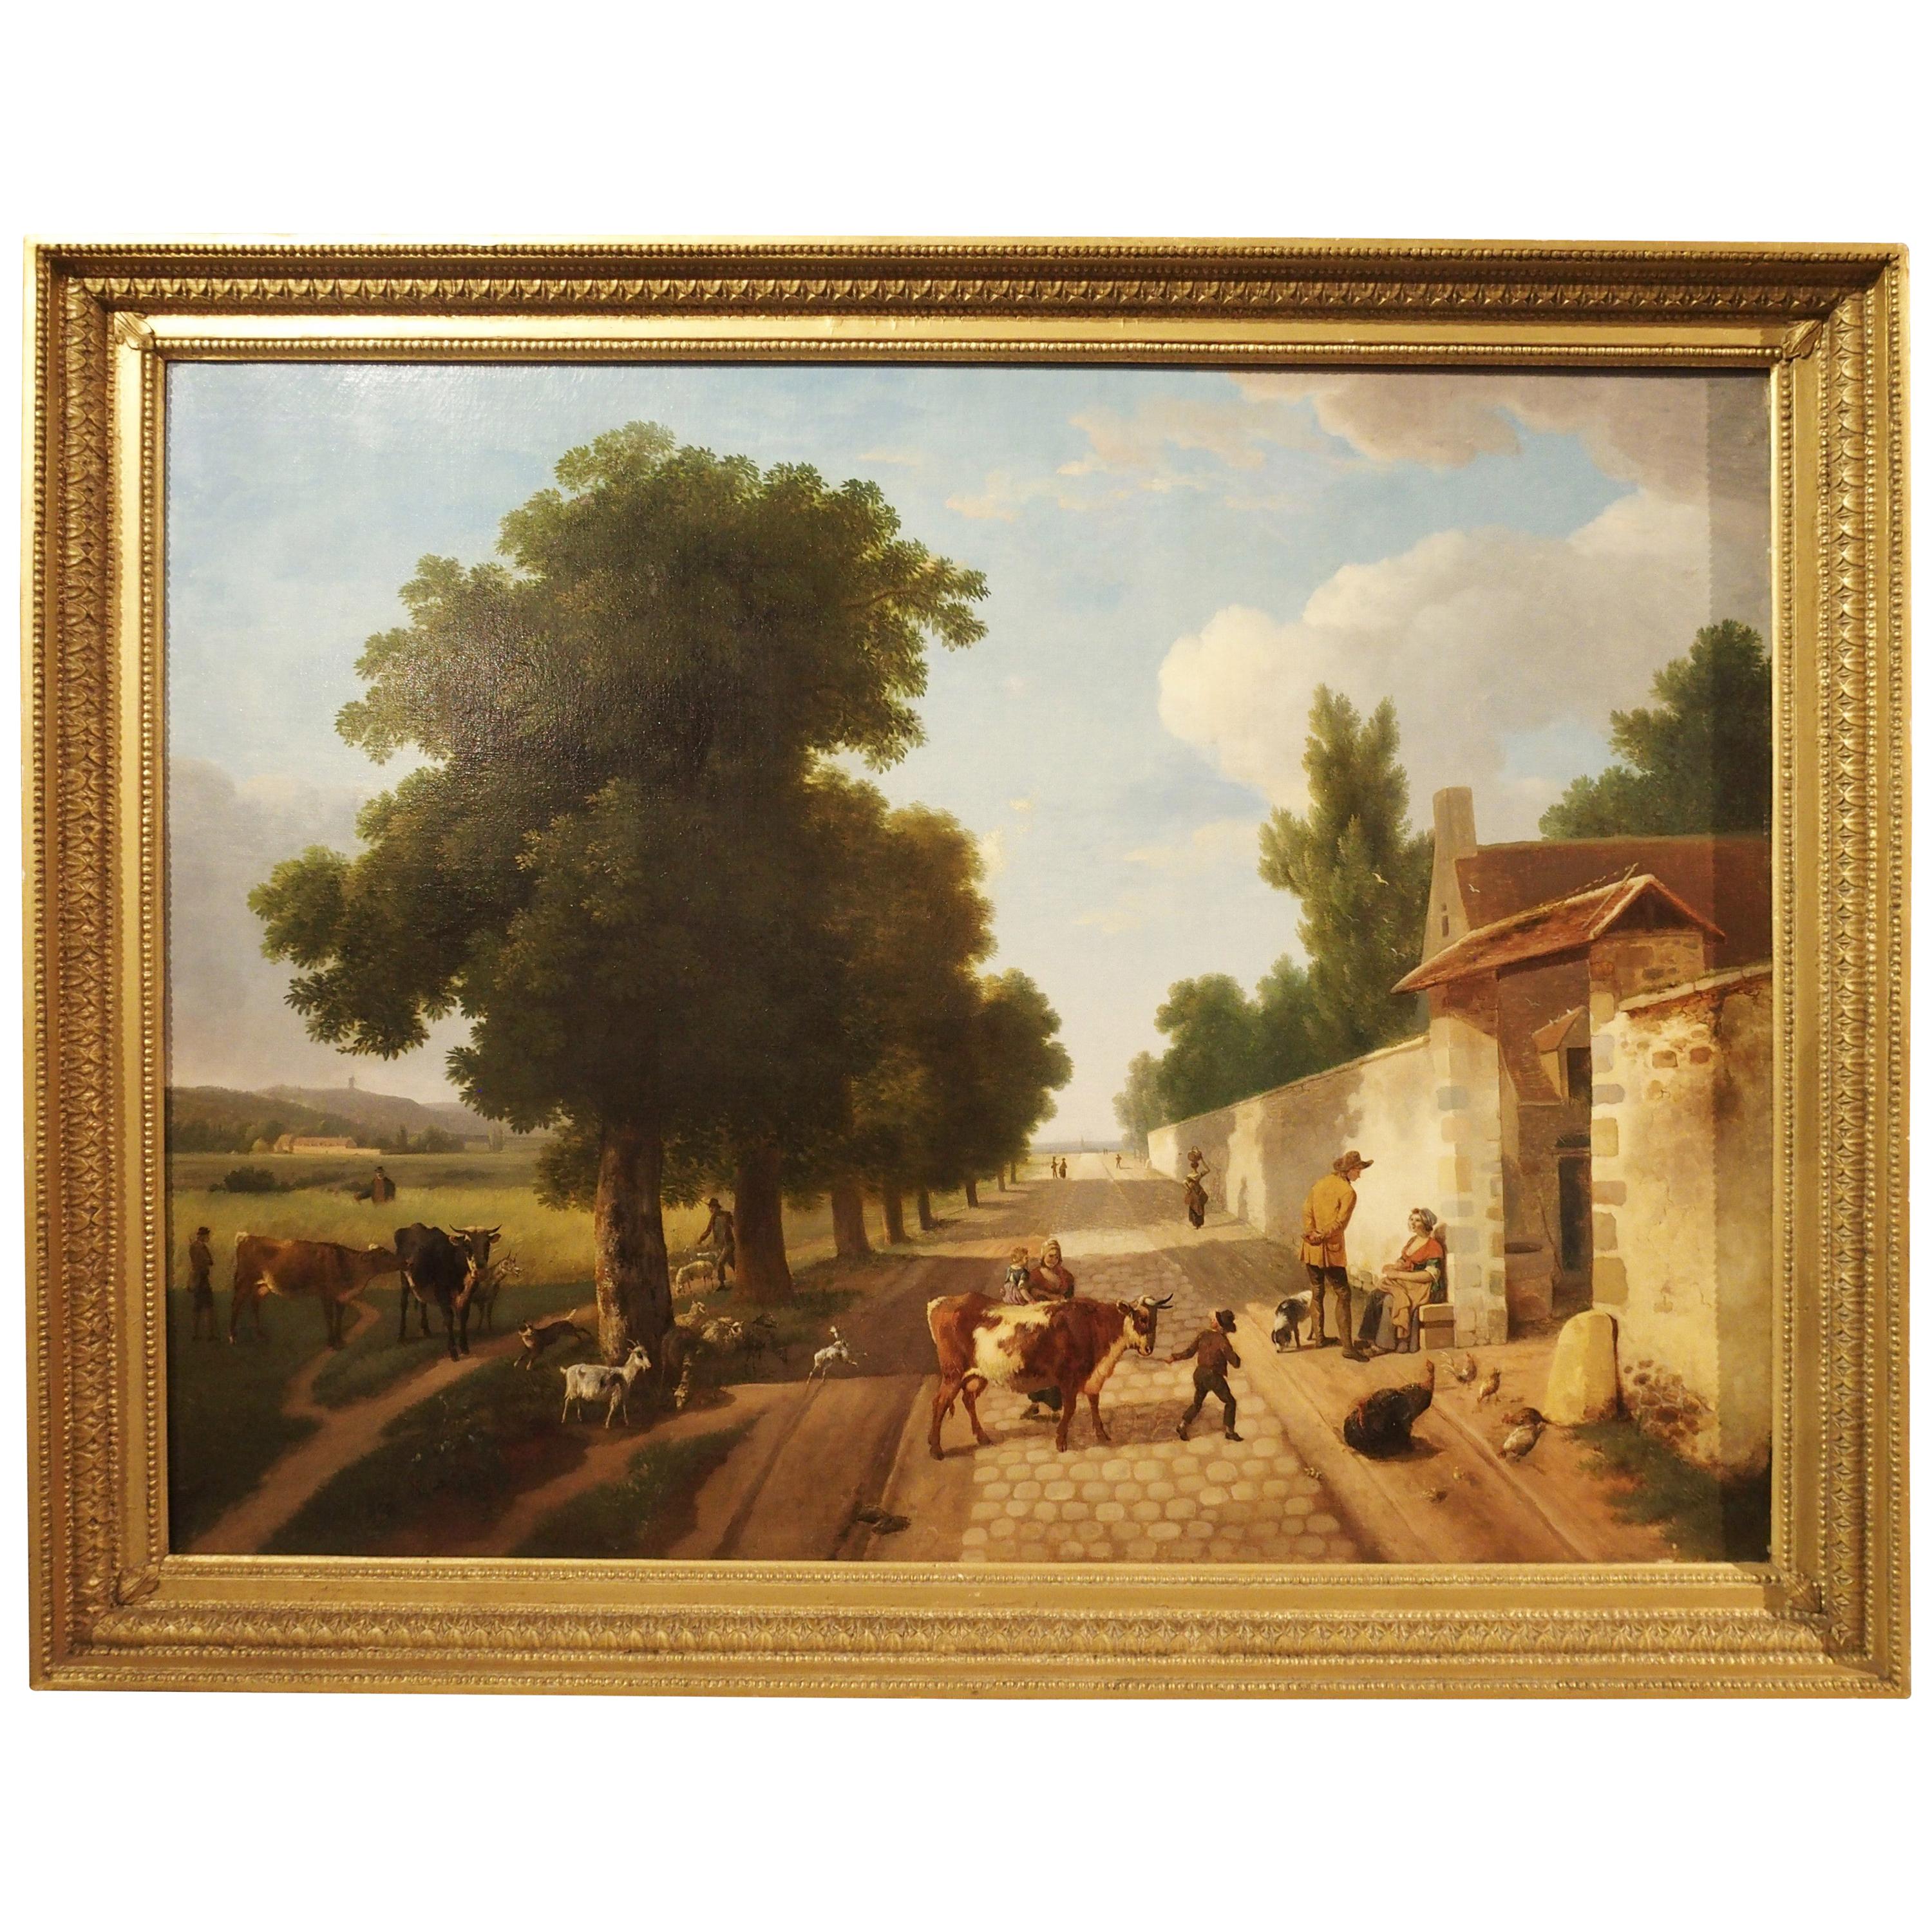 Large 19th Century French Oil Painting in Giltwood Frame, “Le Retour a La Ferme”